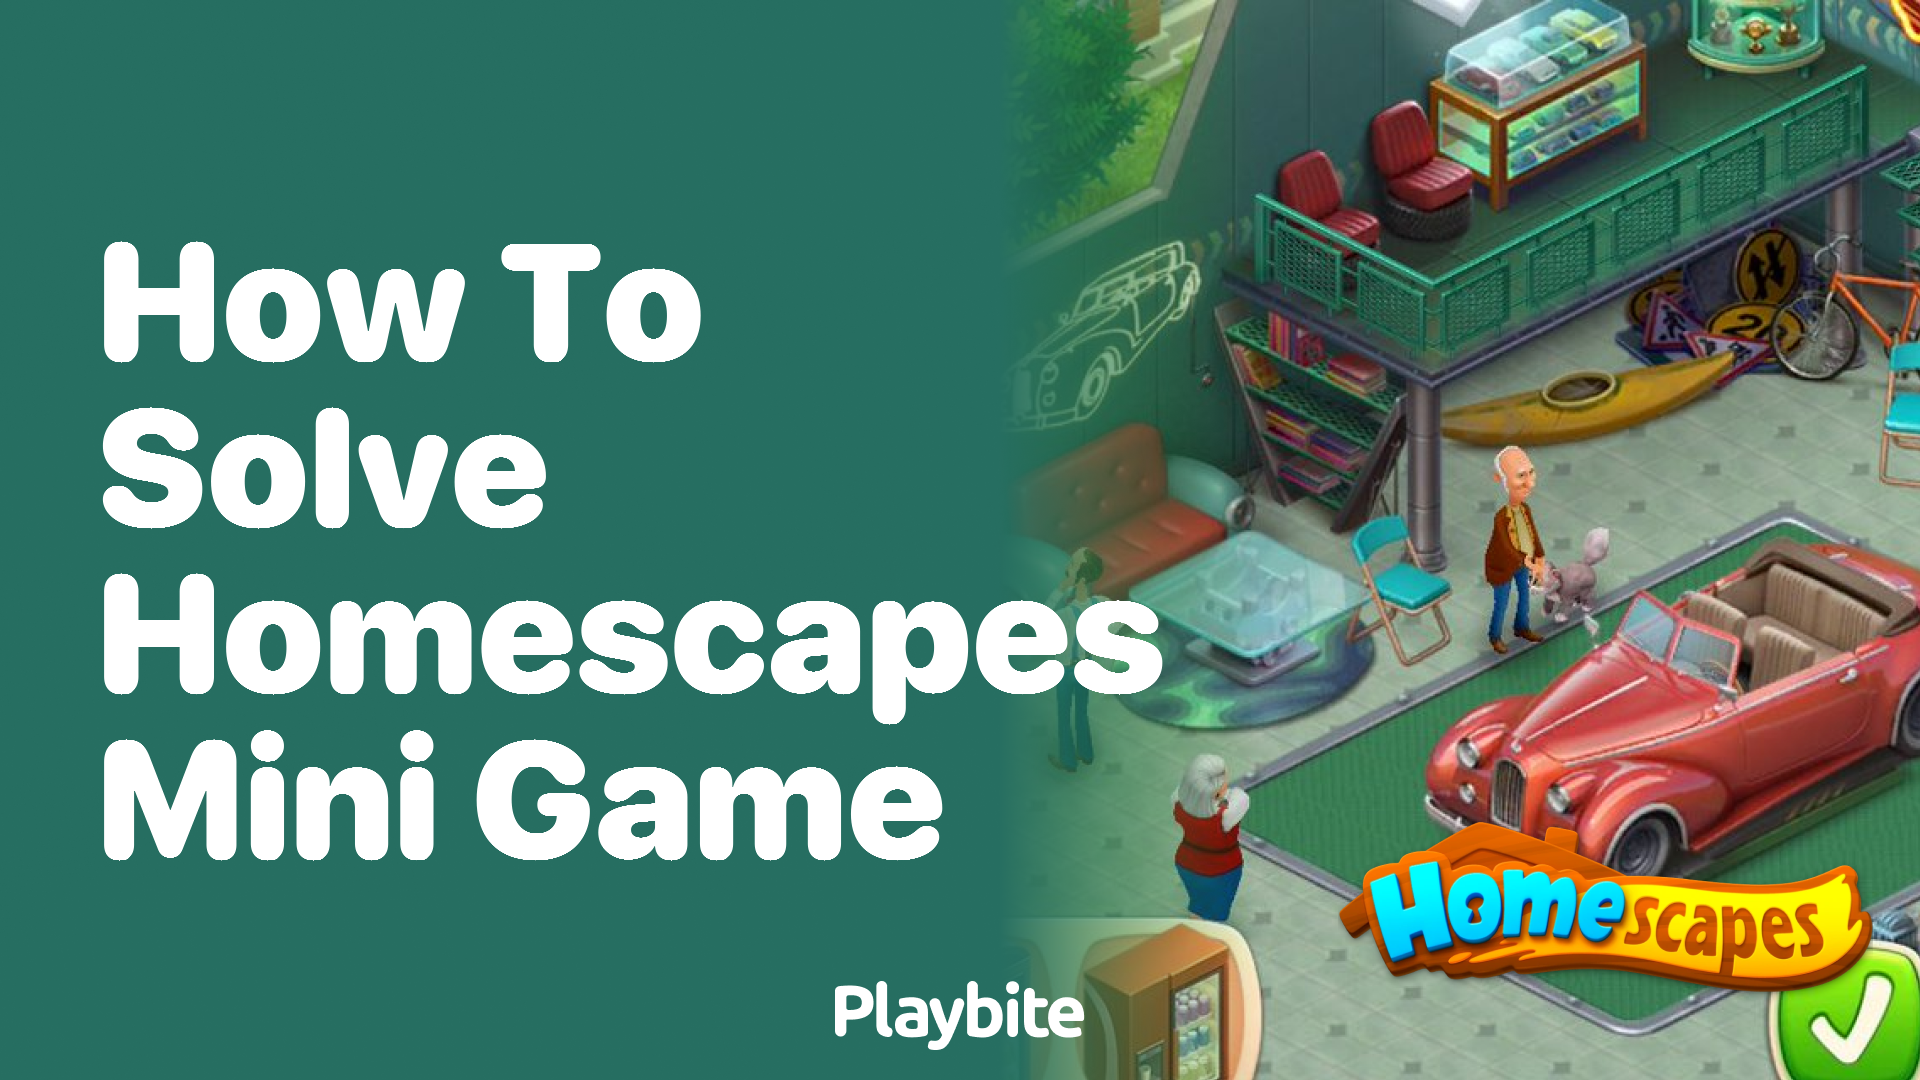 How to Solve Homescapes Mini Game